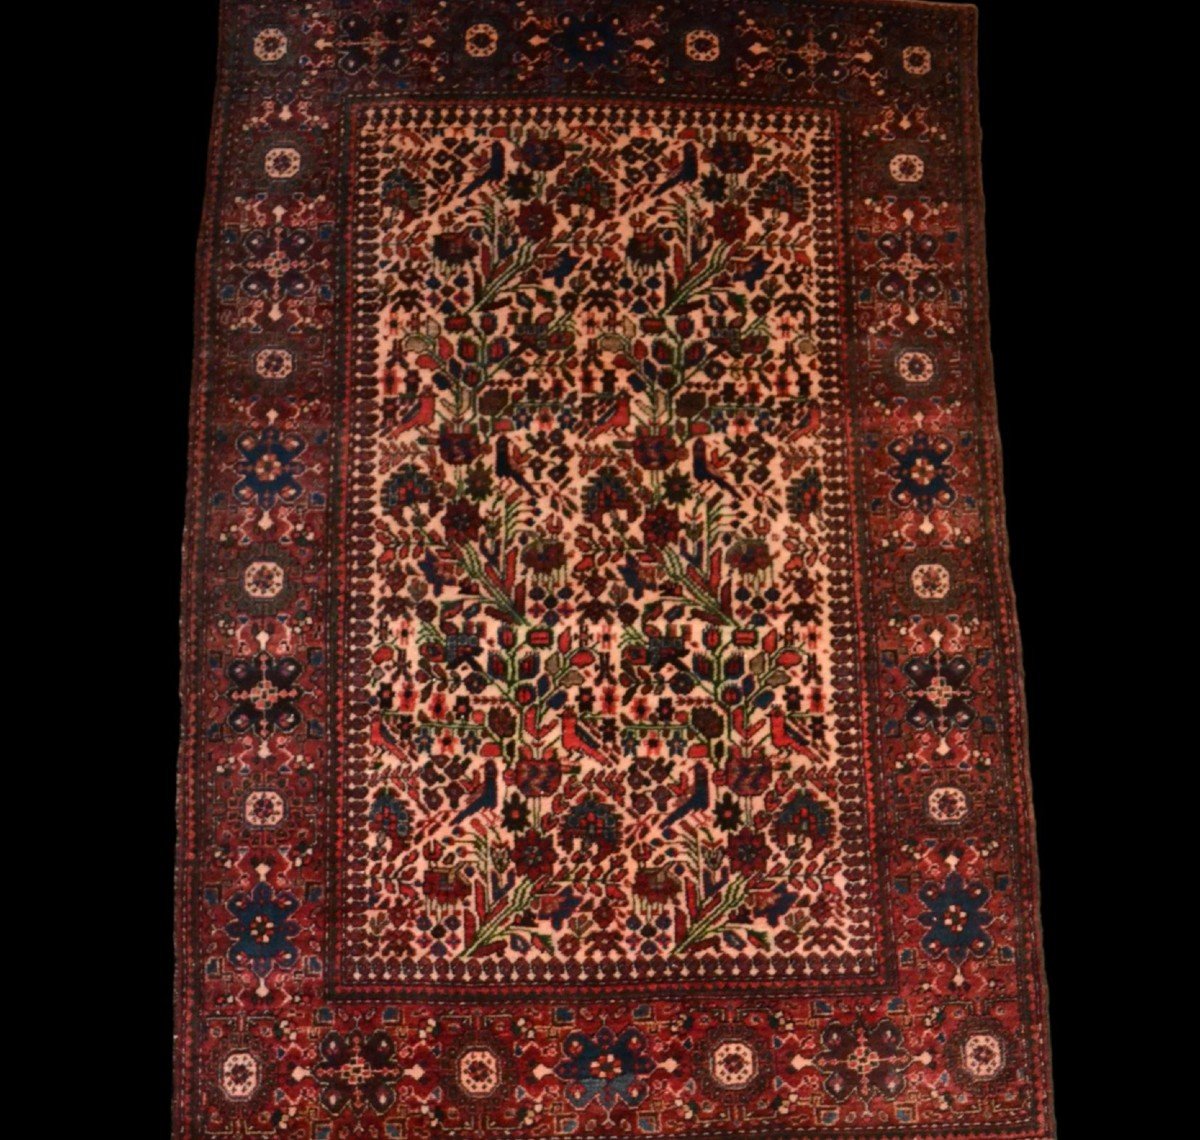 Sarouk Rug, 130 X 194 Cm, Hand-knotted Wool Around The Middle Of The 20th Century, Very Good Condition